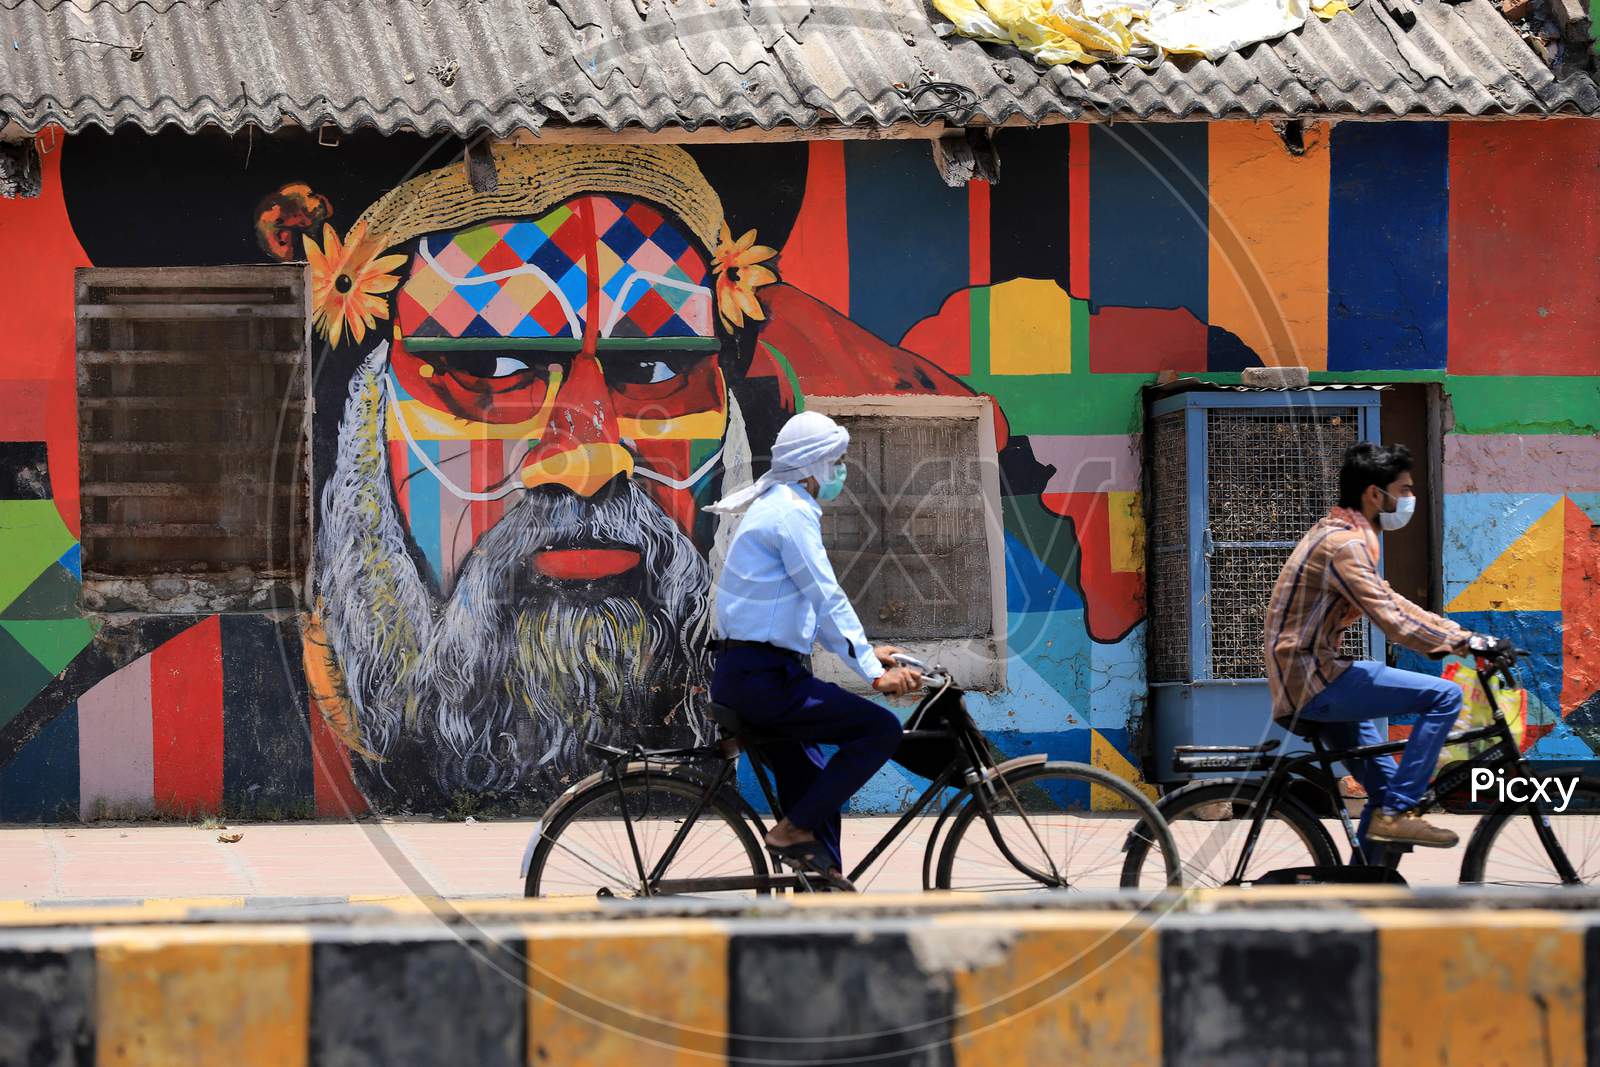 Men ride past a mural On A Hot Weather day In Prayagraj, May 26, 2020.